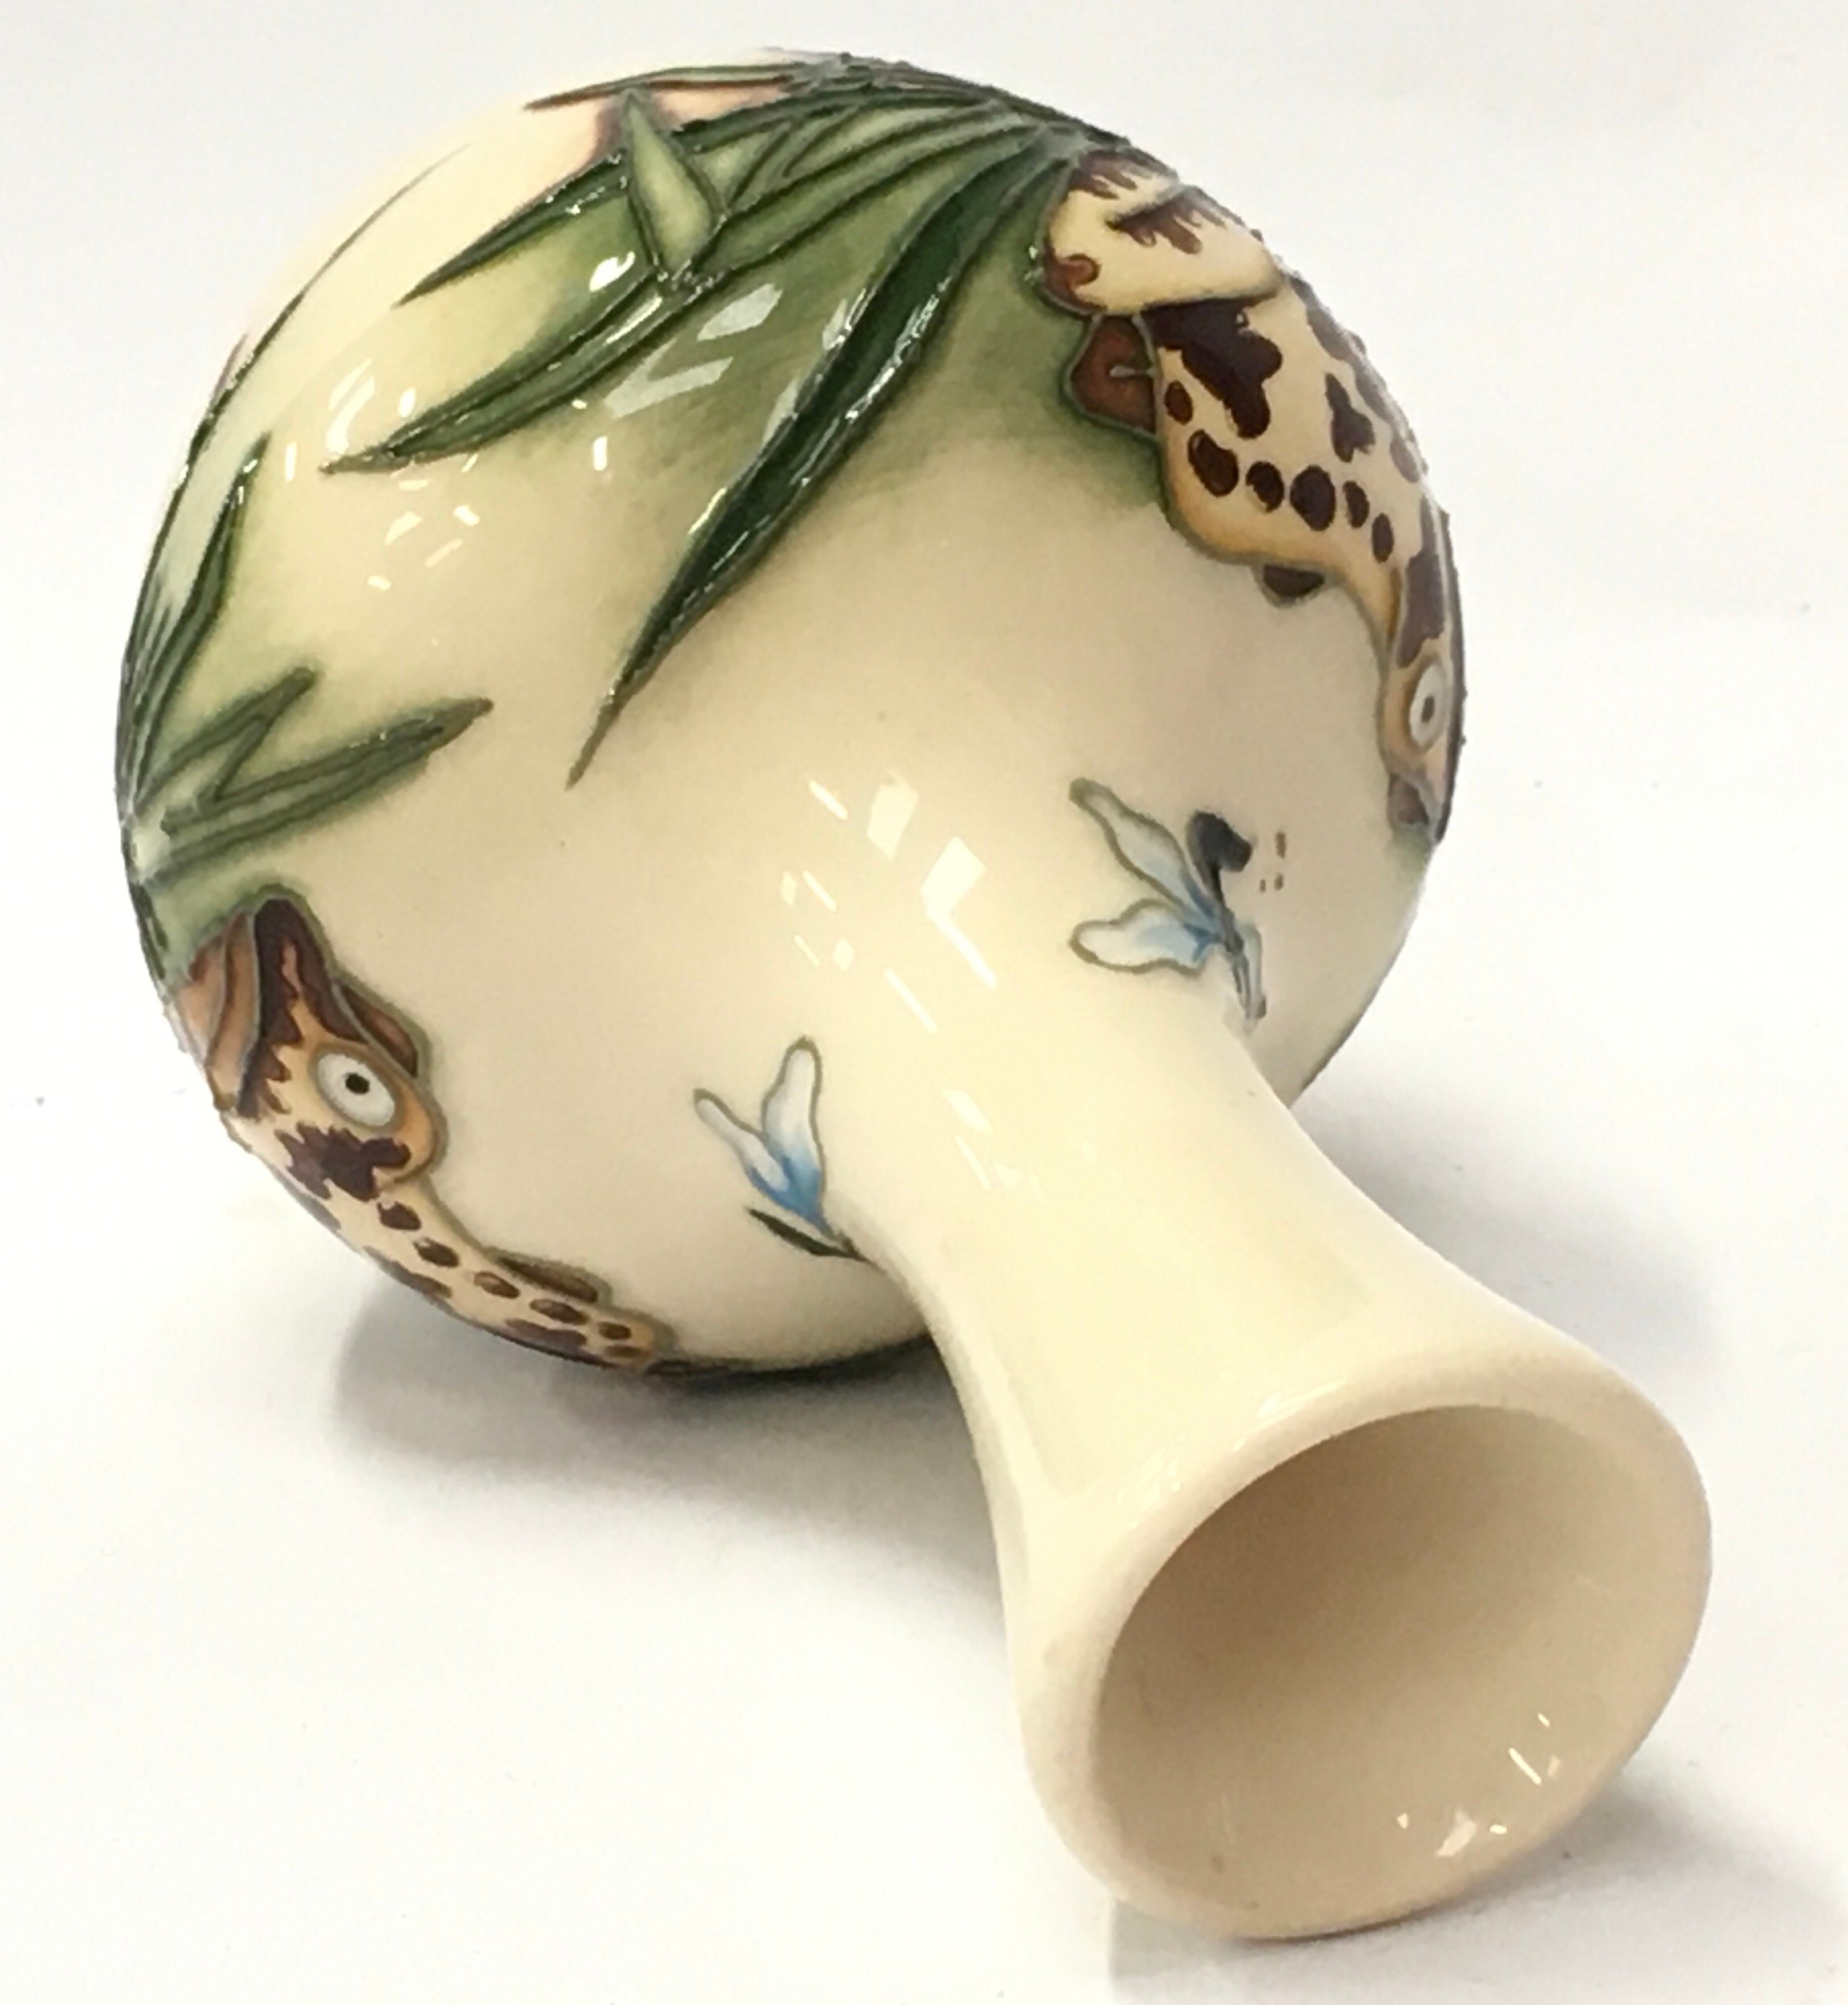 Moorcroft small vase depicting a frog 2009 fully marked & signed to base 4" high. - Image 5 of 5